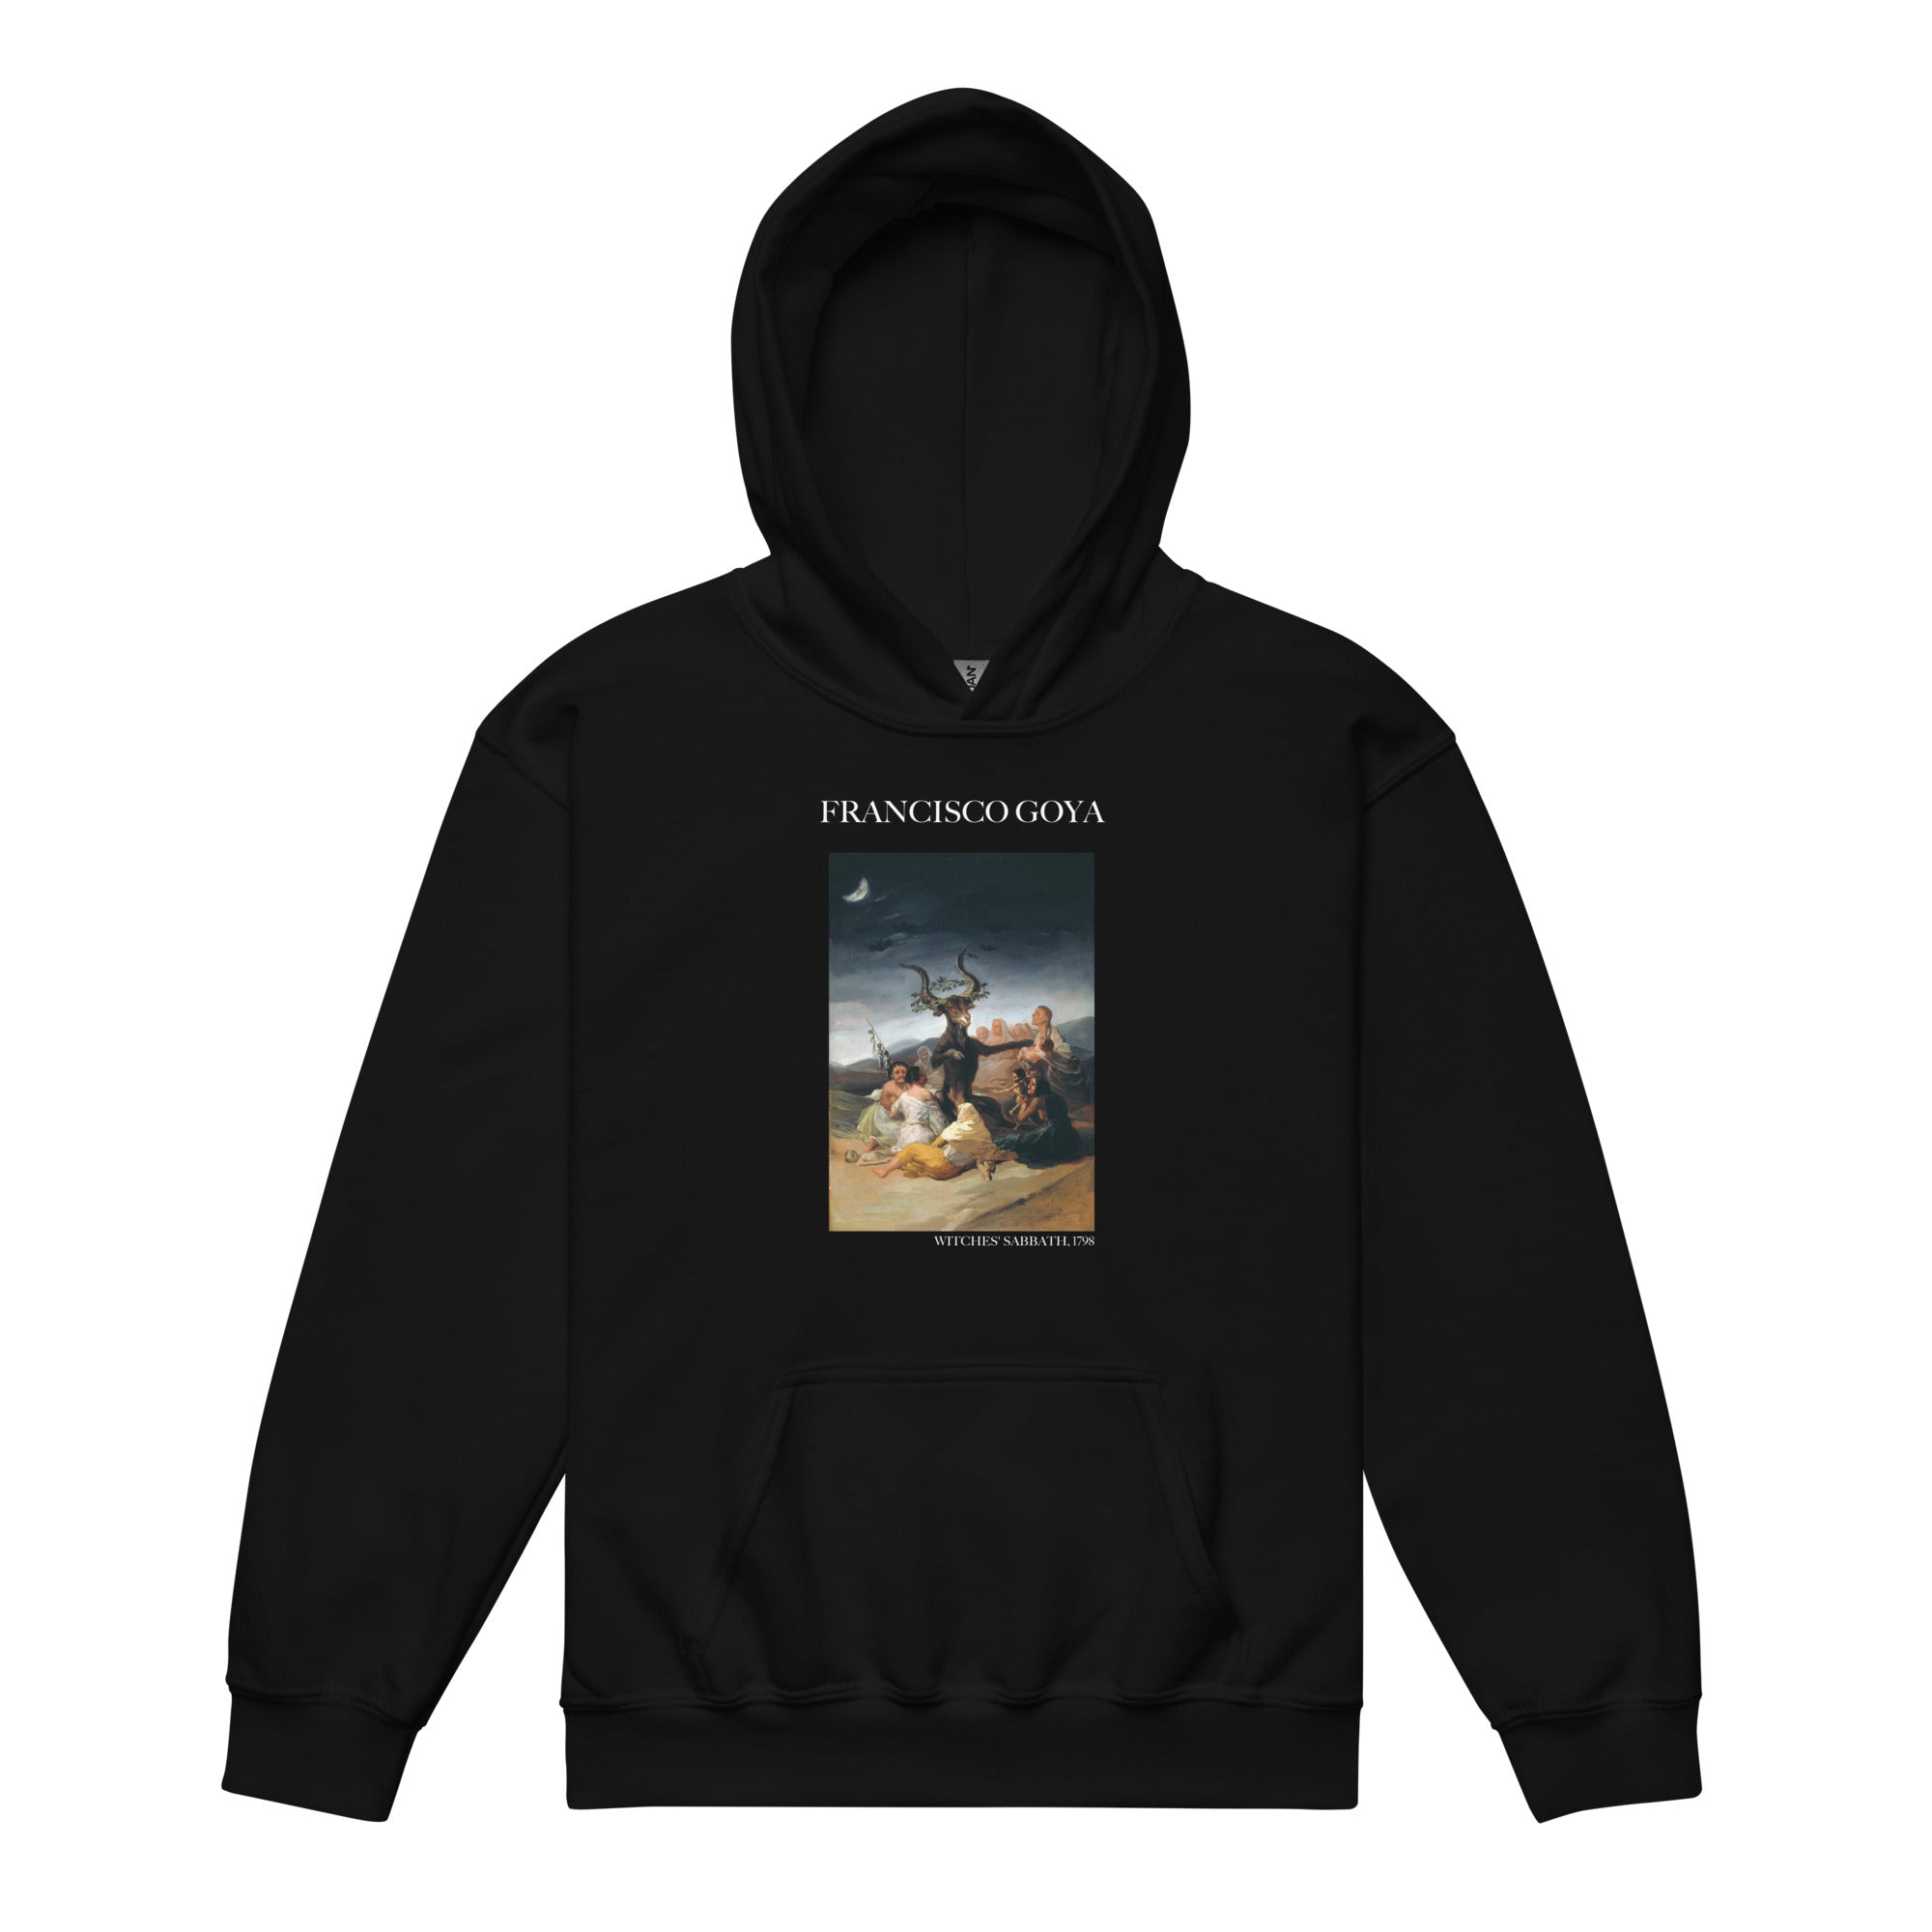 Francisco Goya 'Witches' Sabbath' Famous Painting Hoodie | Premium Youth Art Hoodie